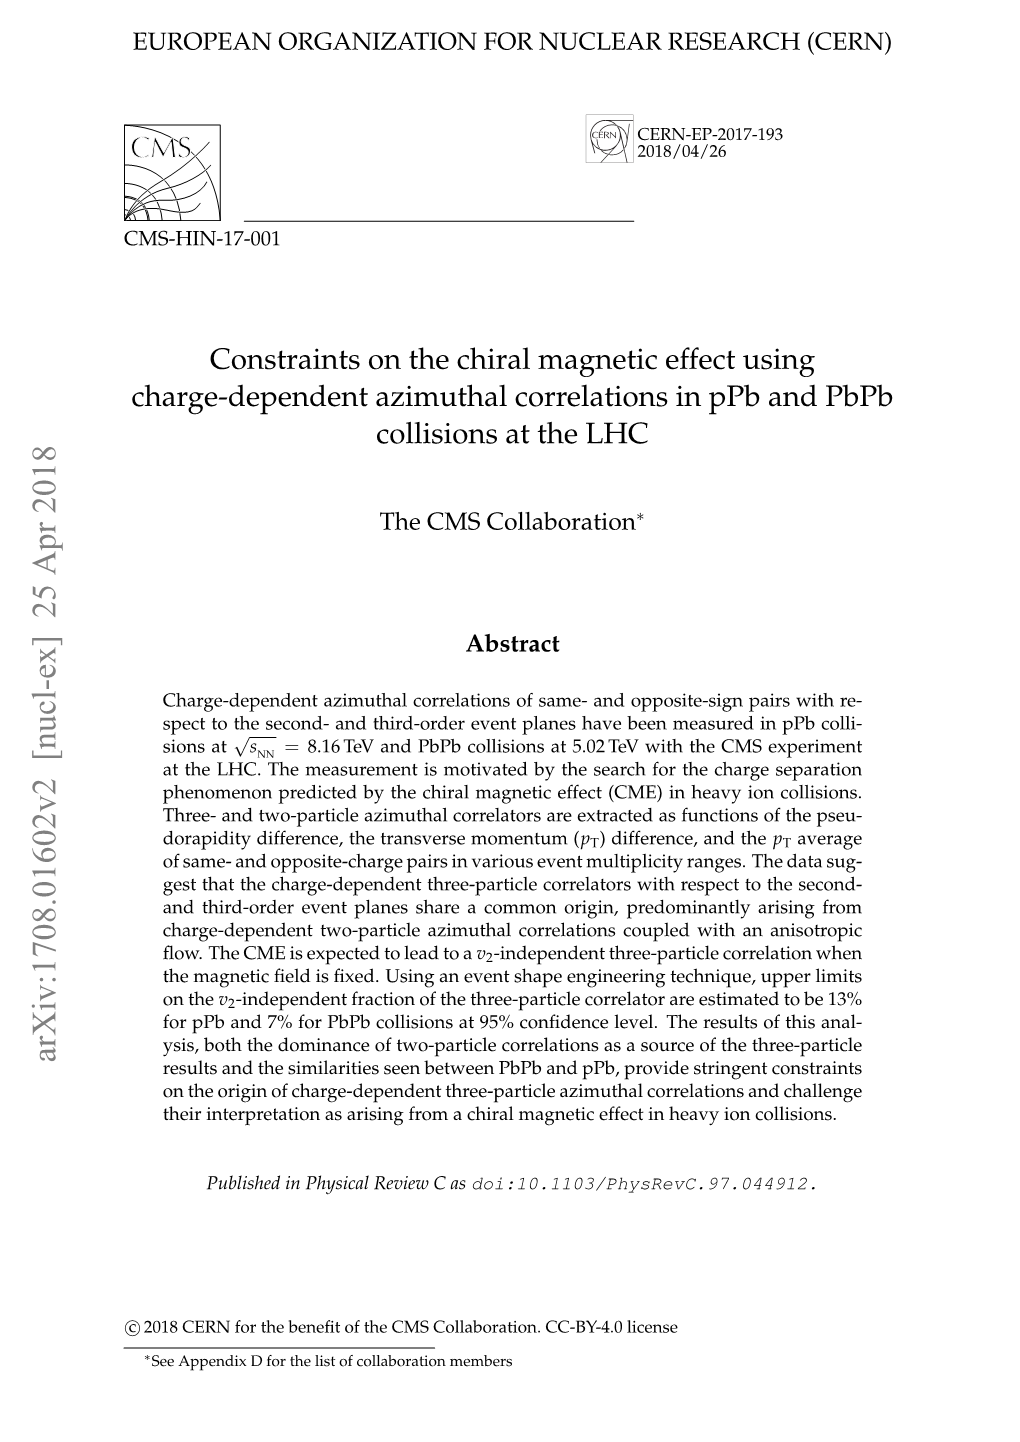 Constraints on the Chiral Magnetic Effect Using Charge-Dependent Azimuthal Correlations in Ppb and Pbpb Collisions at the LHC